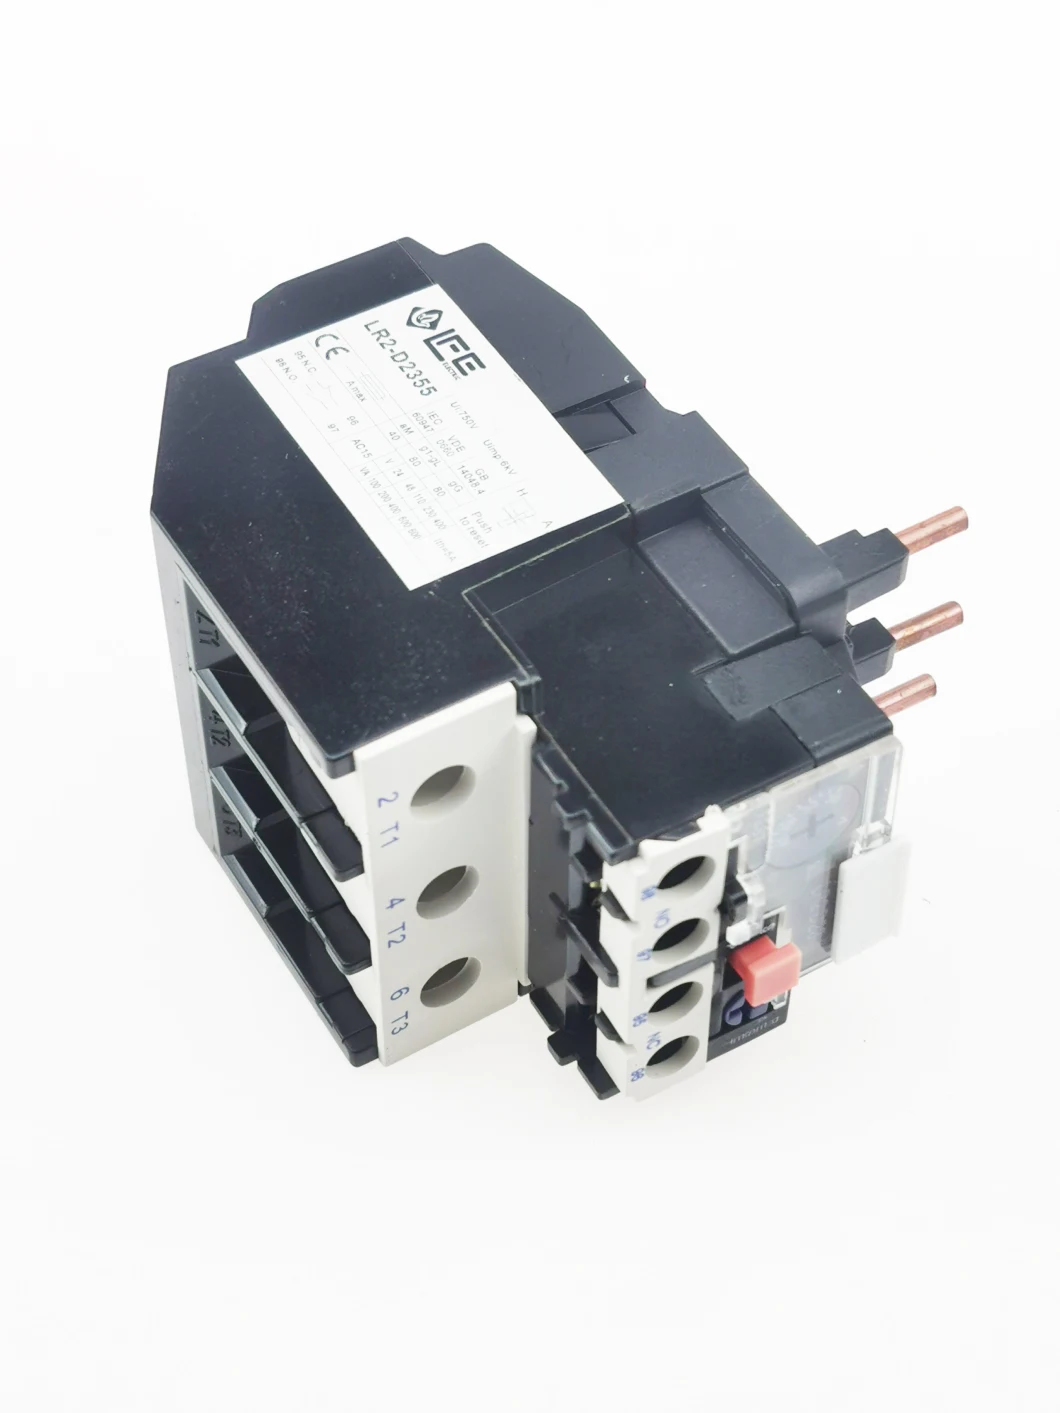 Lr2-D33 Thermal Overload Relay, ISO9001 Passed High Quality Thermal Relay, CE Proved Thermal Overload Irelay